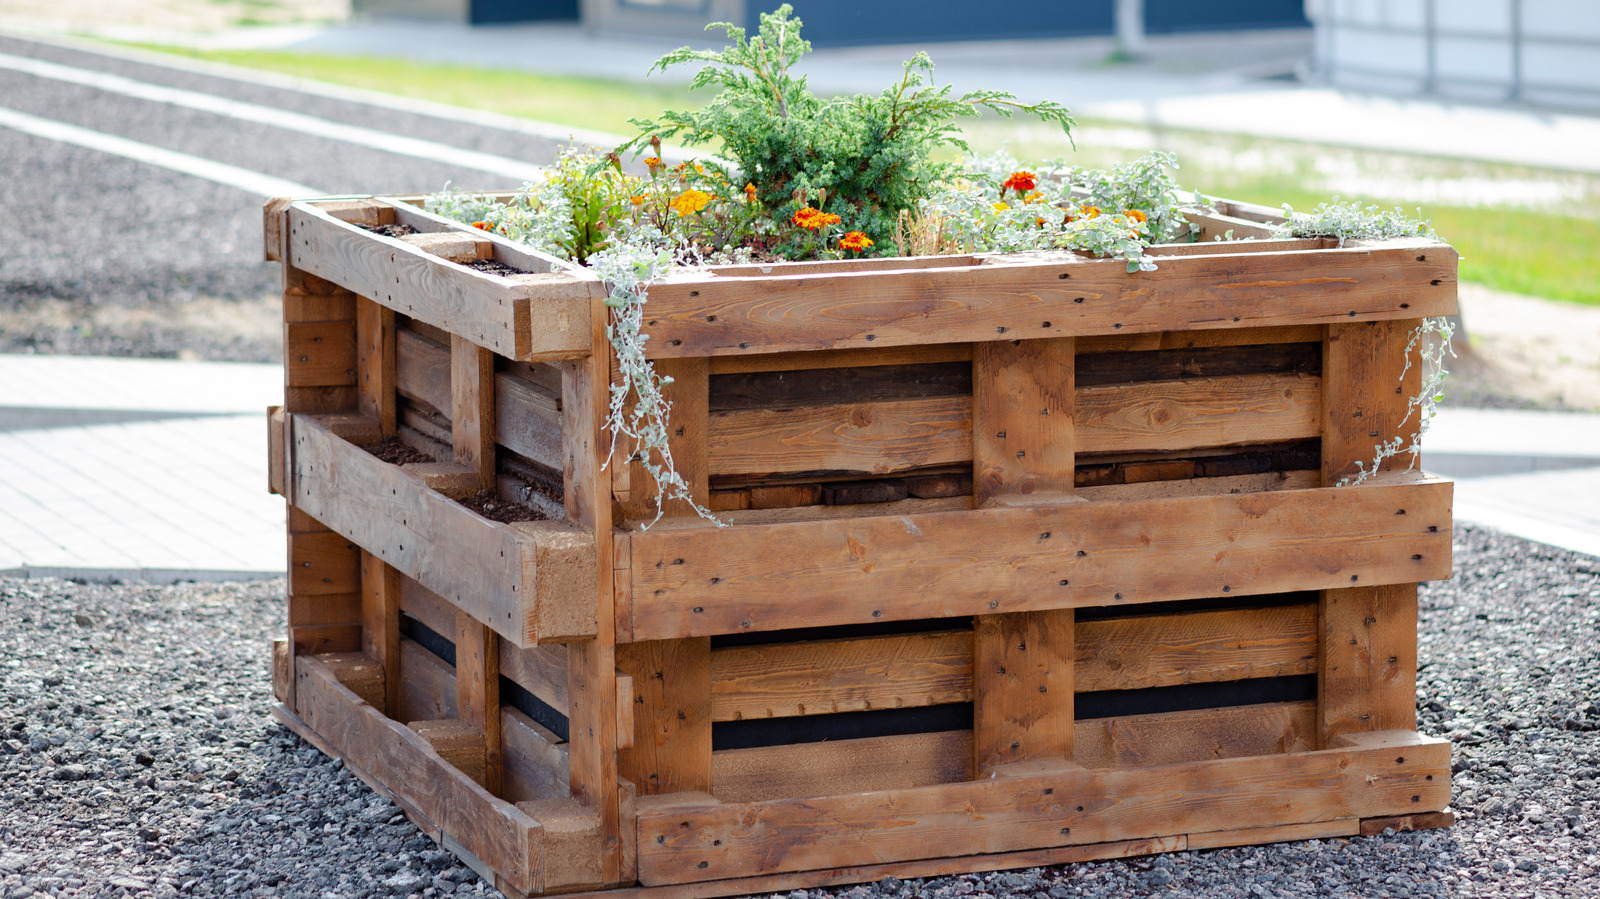 https://www.housedigest.com/img/gallery/upcycle-wooden-pallets-to-make-the-ultimate-raised-garden-bed/l-intro-1689271100.jpg